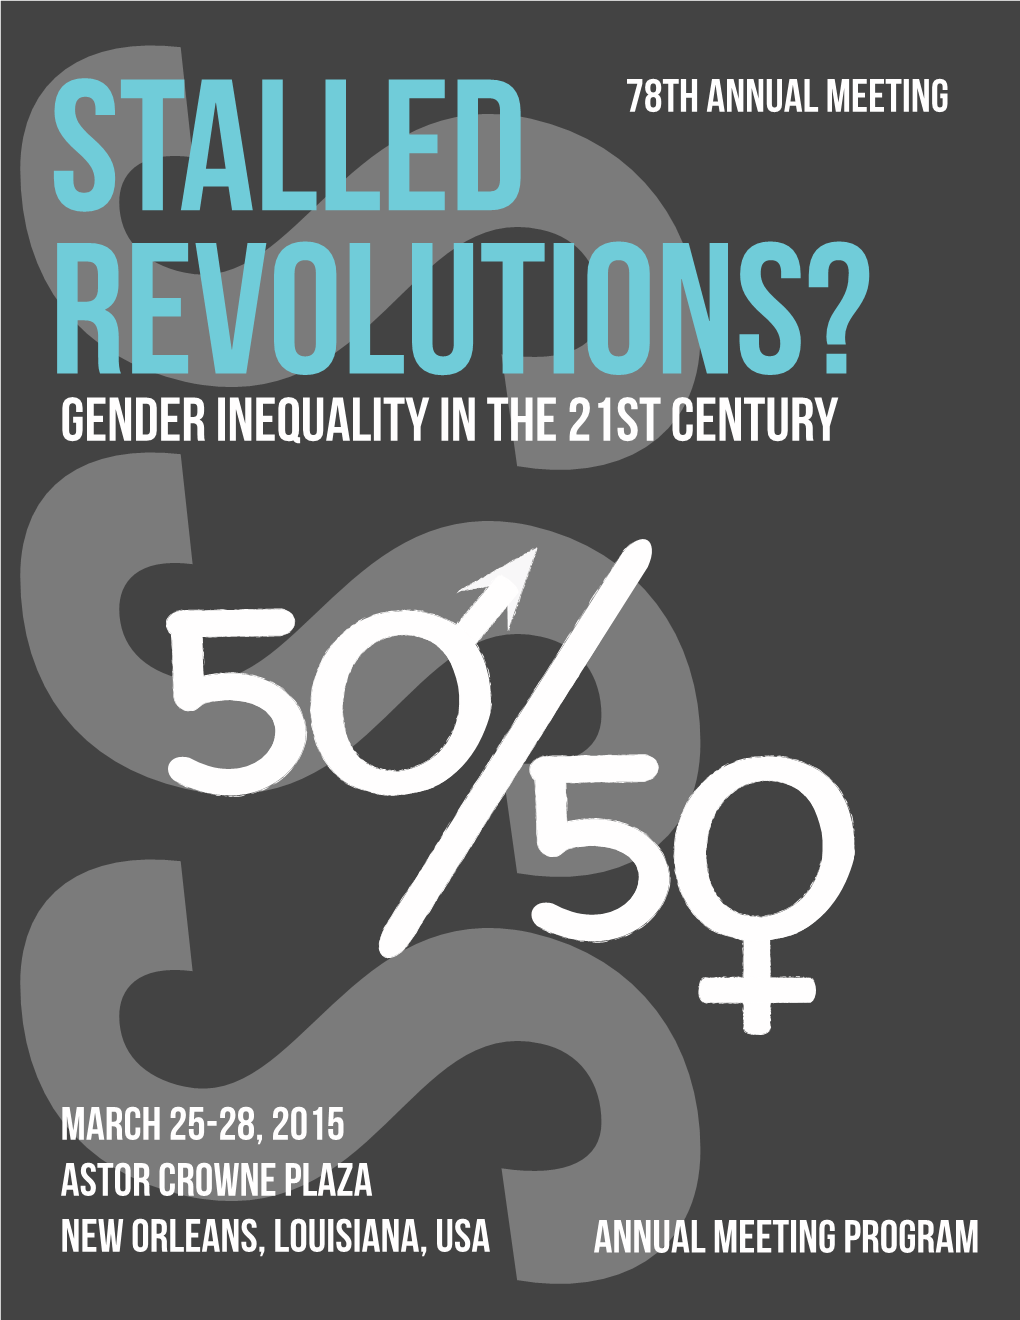 Gender Inequality in the 21St Century